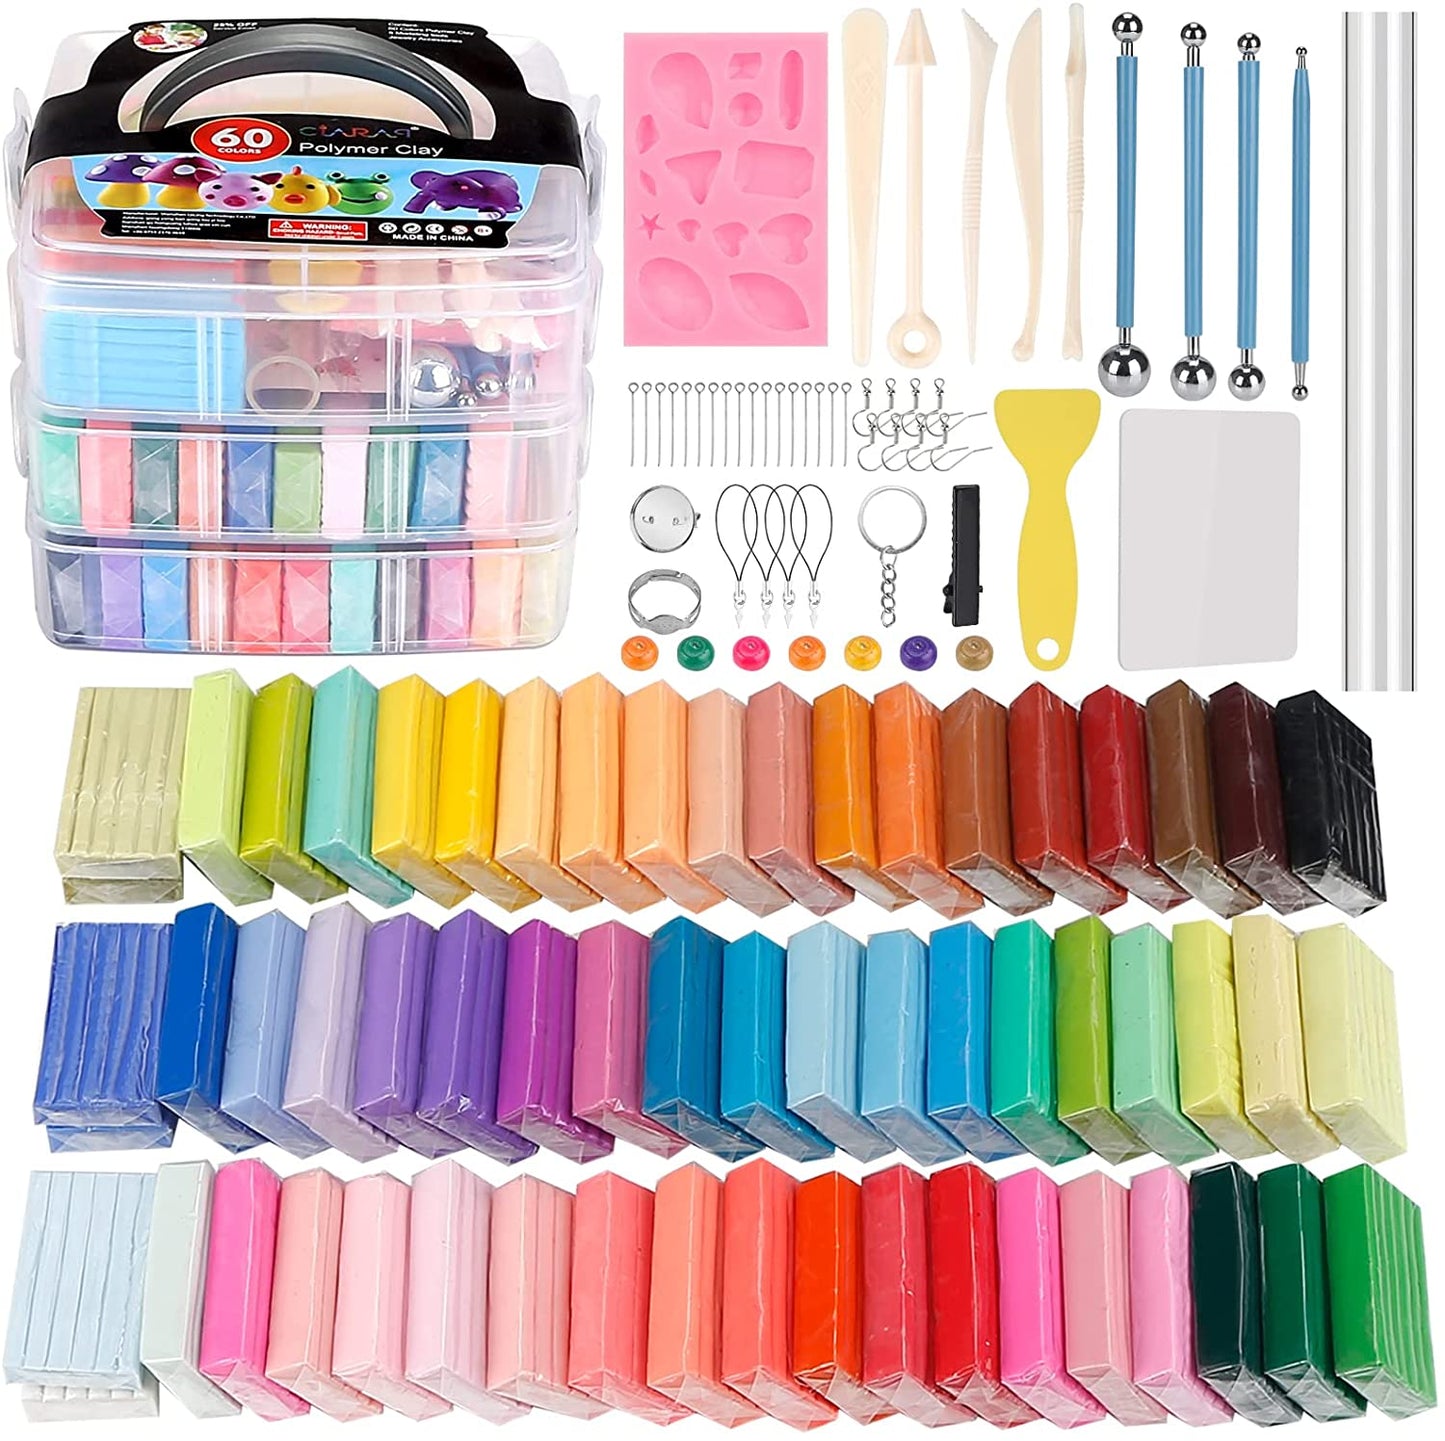 Polymer Clay Starter Kit, 42/32 Colors of Oven-Bake, Baking Clay Blocks,  with 5 Sculpting Tools and 30 Accessories in Storage Box